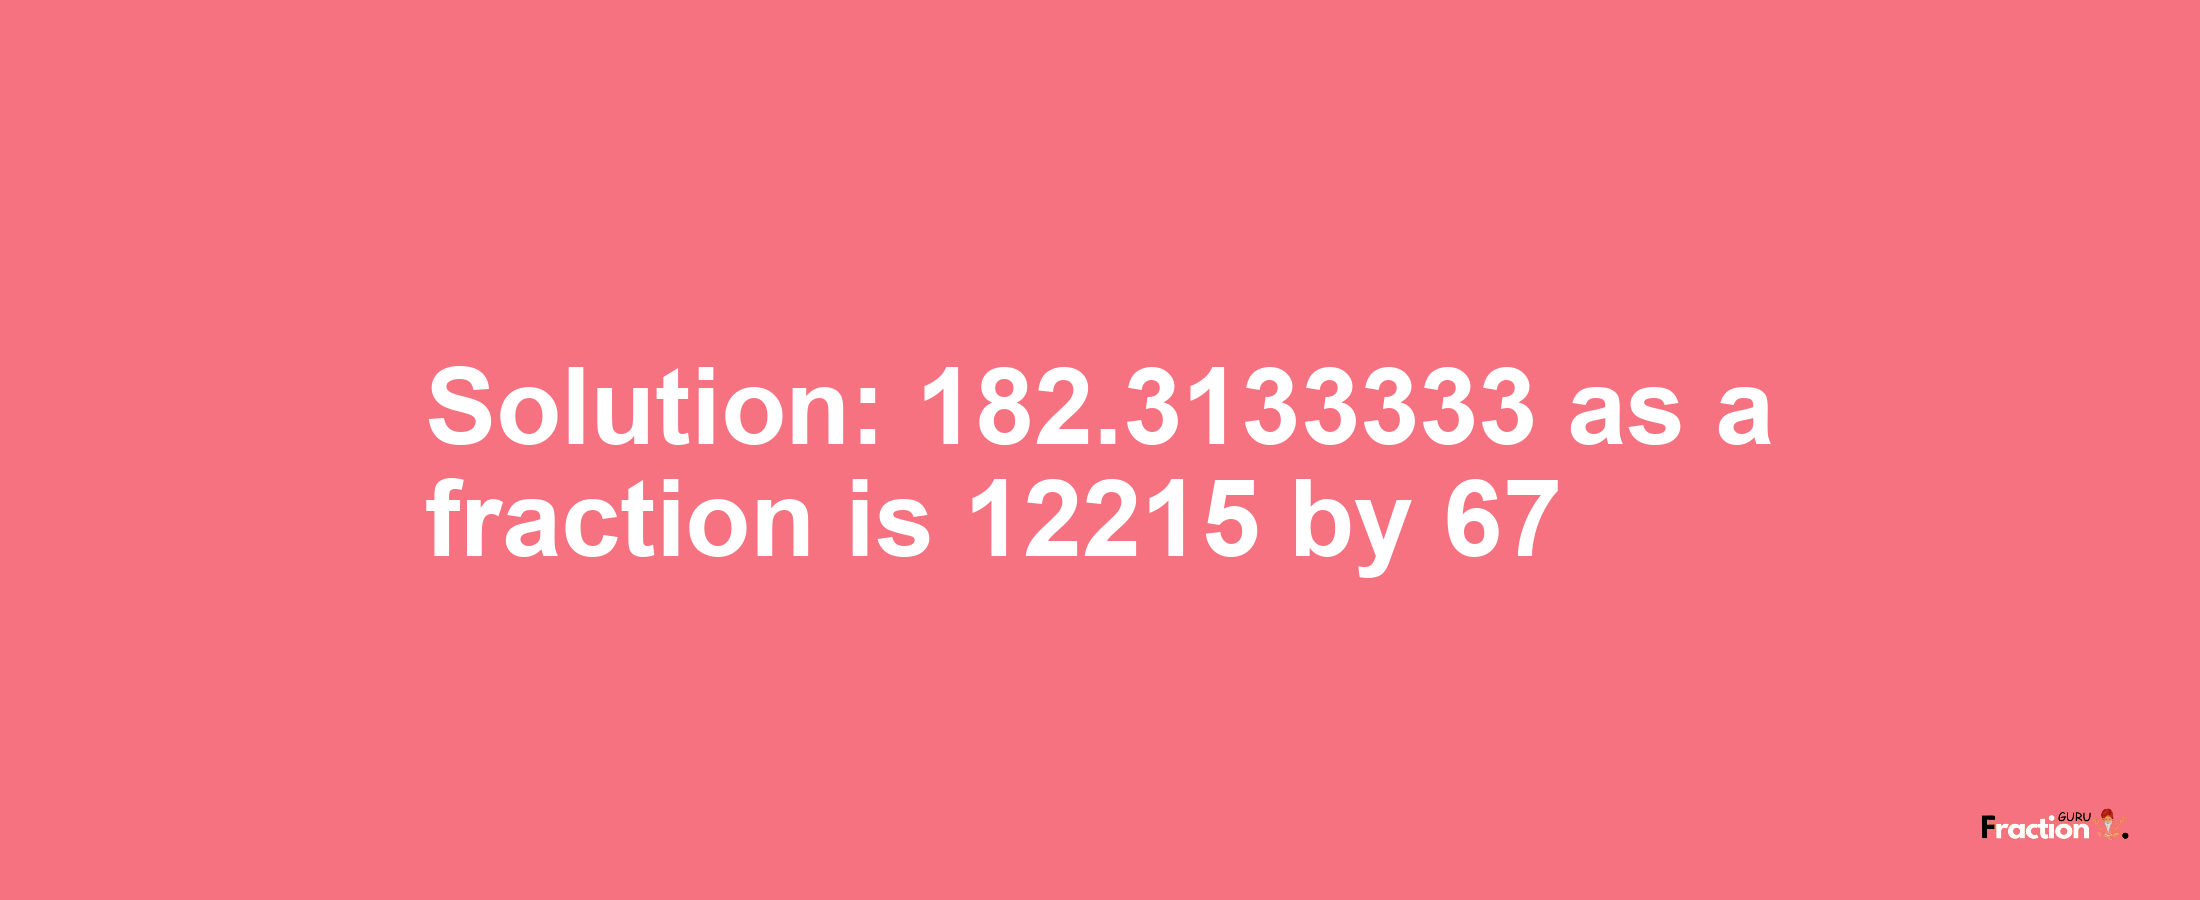 Solution:182.3133333 as a fraction is 12215/67